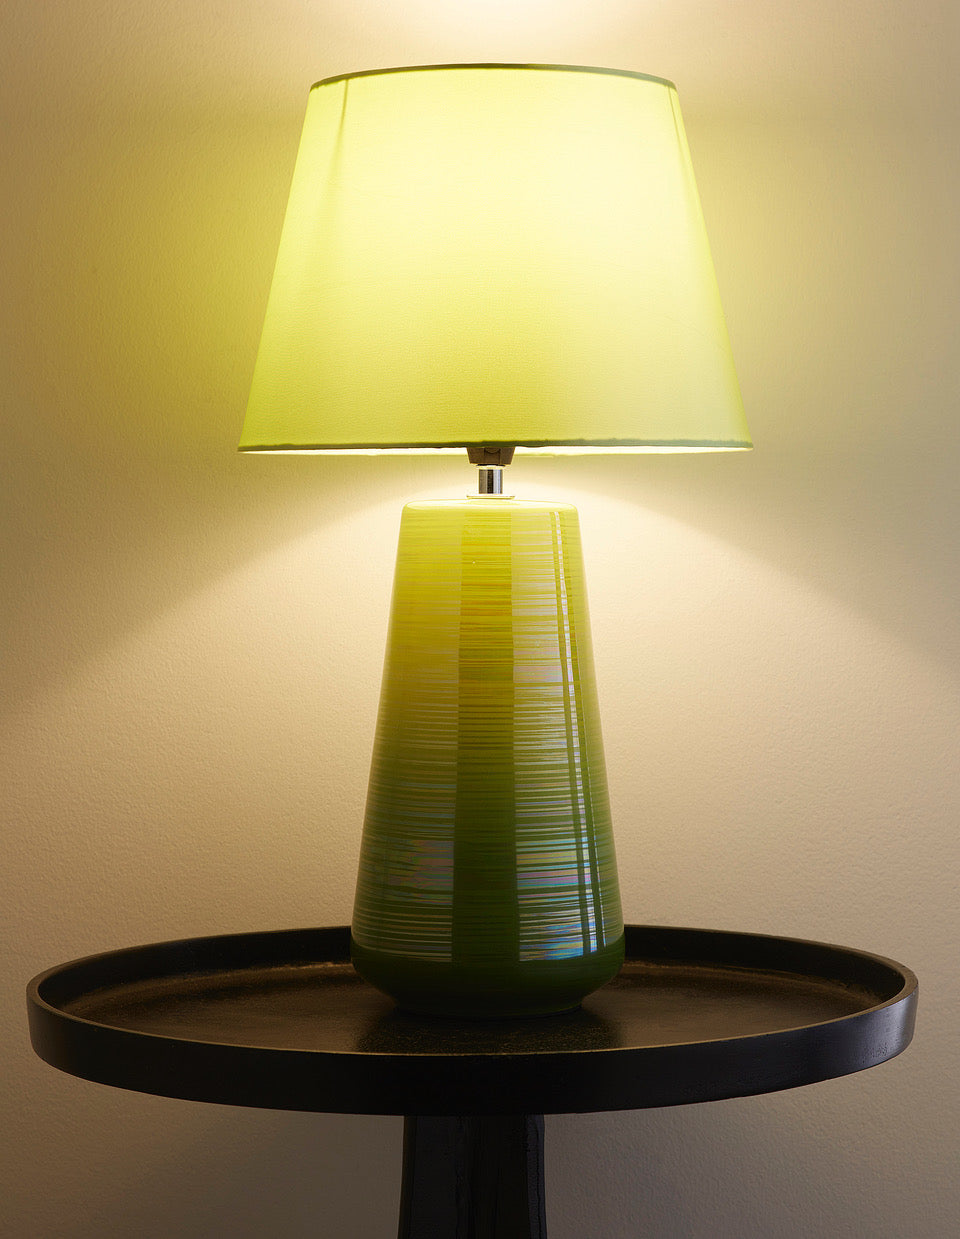 Canada 45cm Orange or Green Ceramic Table Lamp with Matching Shade